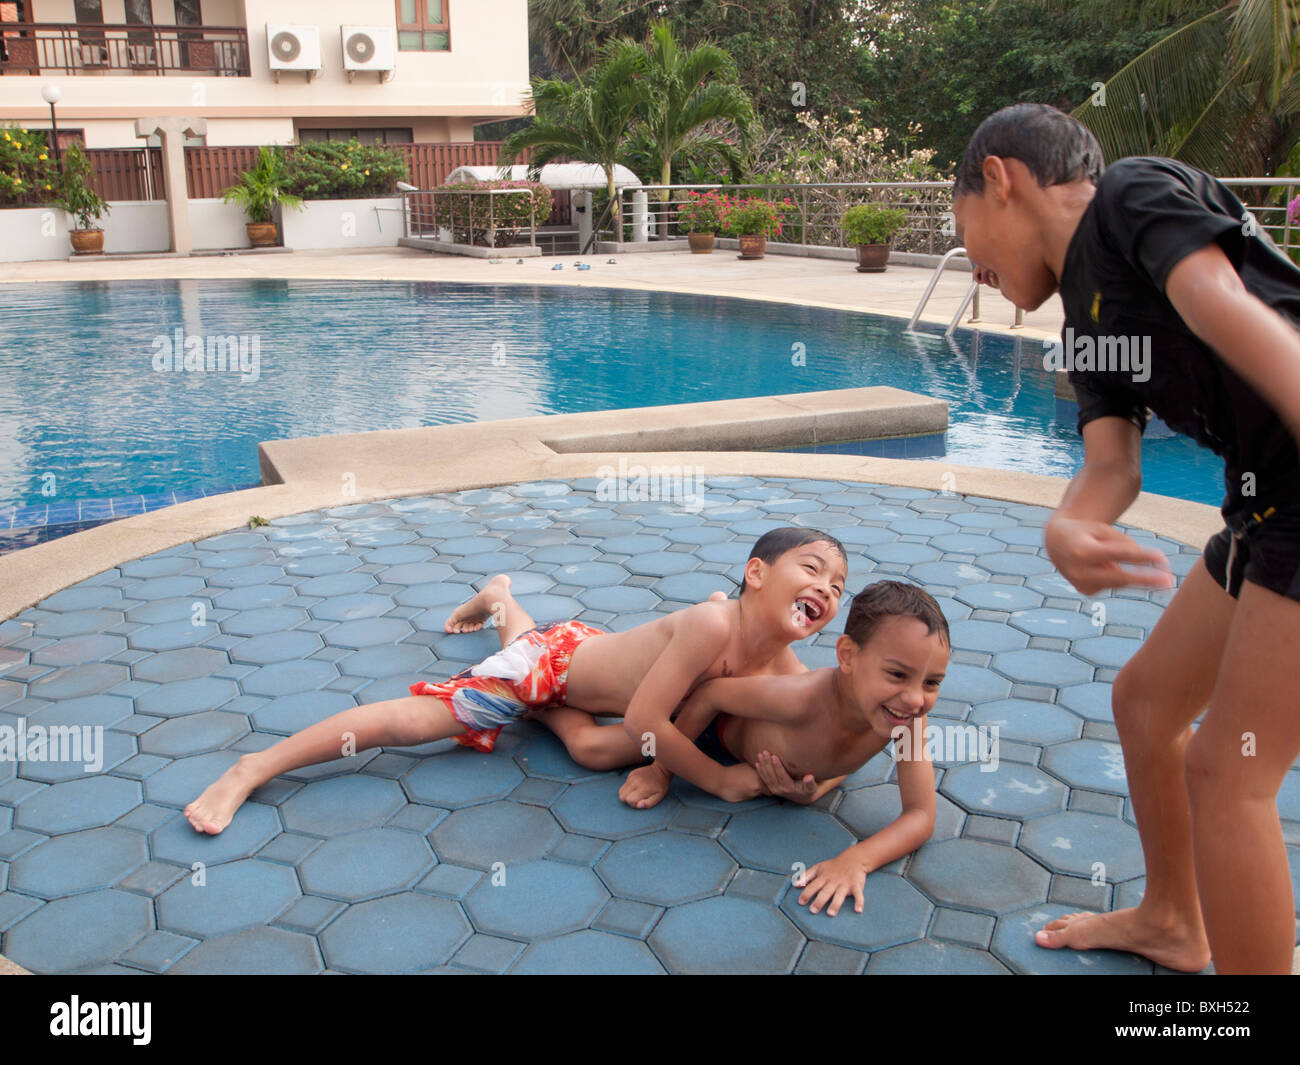 Boys playing wrestling at a swimming pool Stock Photo